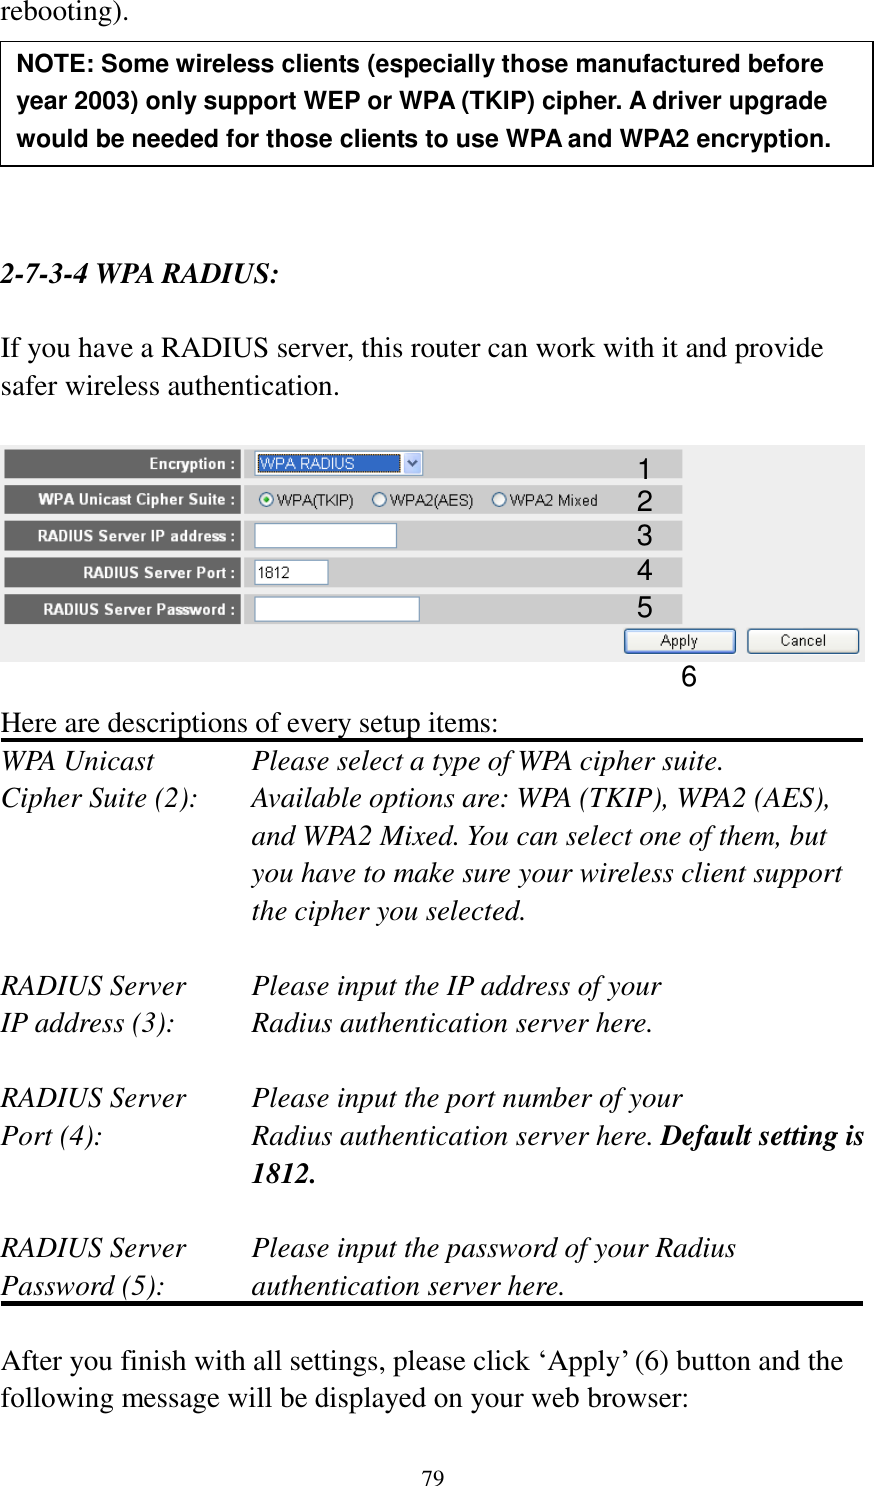 79 rebooting).       2-7-3-4 WPA RADIUS:  If you have a RADIUS server, this router can work with it and provide safer wireless authentication.    Here are descriptions of every setup items: WPA Unicast      Please select a type of WPA cipher suite. Cipher Suite (2):  Available options are: WPA (TKIP), WPA2 (AES), and WPA2 Mixed. You can select one of them, but you have to make sure your wireless client support the cipher you selected.  RADIUS Server     Please input the IP address of your IP address (3):     Radius authentication server here.  RADIUS Server     Please input the port number of your Port (4):    Radius authentication server here. Default setting is 1812.  RADIUS Server     Please input the password of your Radius Password (5):    authentication server here.  After you finish with all settings, please click ‘Apply’ (6) button and the following message will be displayed on your web browser: NOTE: Some wireless clients (especially those manufactured before year 2003) only support WEP or WPA (TKIP) cipher. A driver upgrade would be needed for those clients to use WPA and WPA2 encryption. 1 3 4 2 5 6 